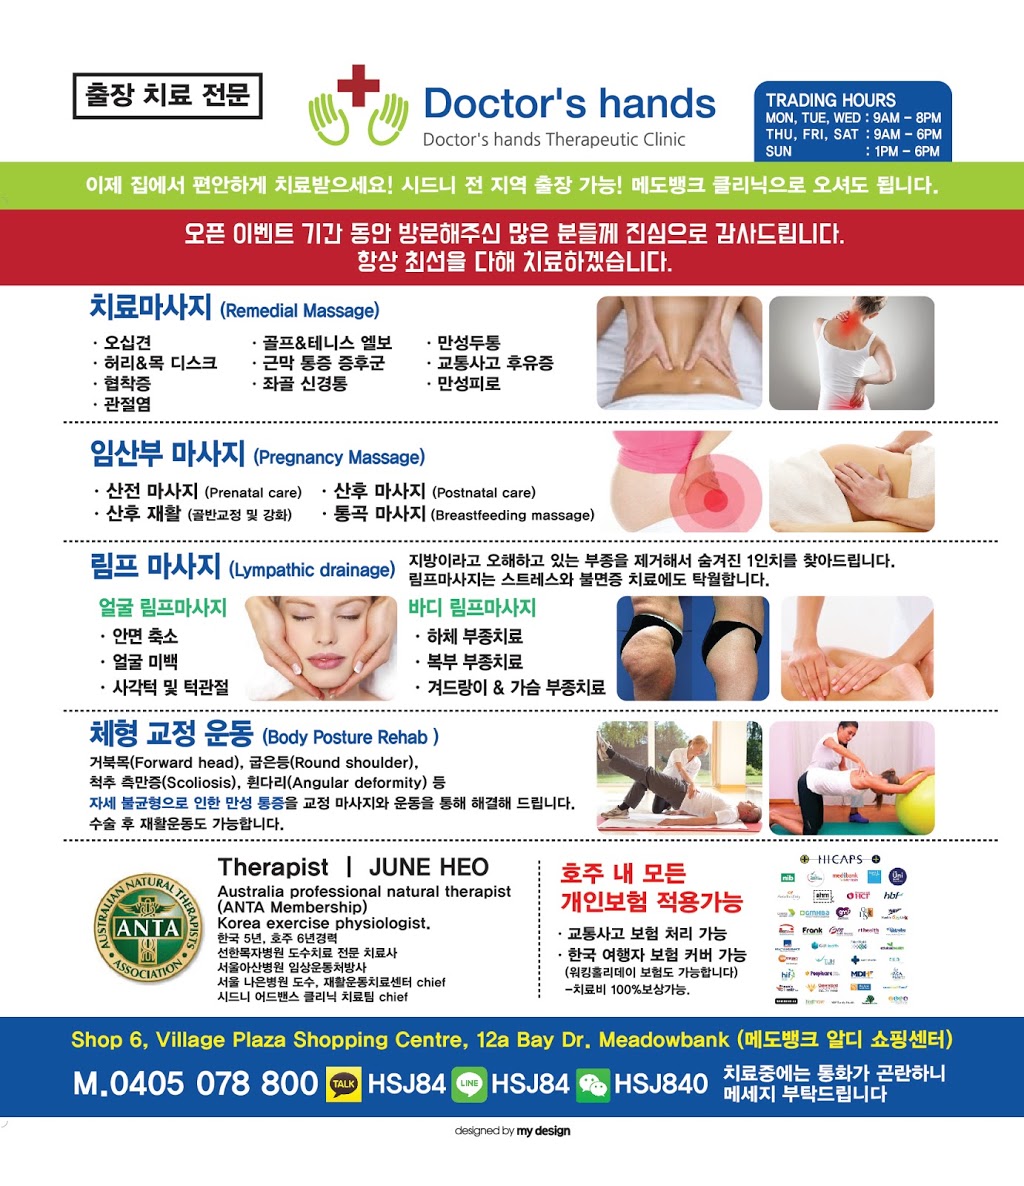 Doctors hands therapeutic clinic | Australia, New South Wales, Meadowbank, Shop6,12a Village plaza 11bay Drive | Phone: 0405 078 800